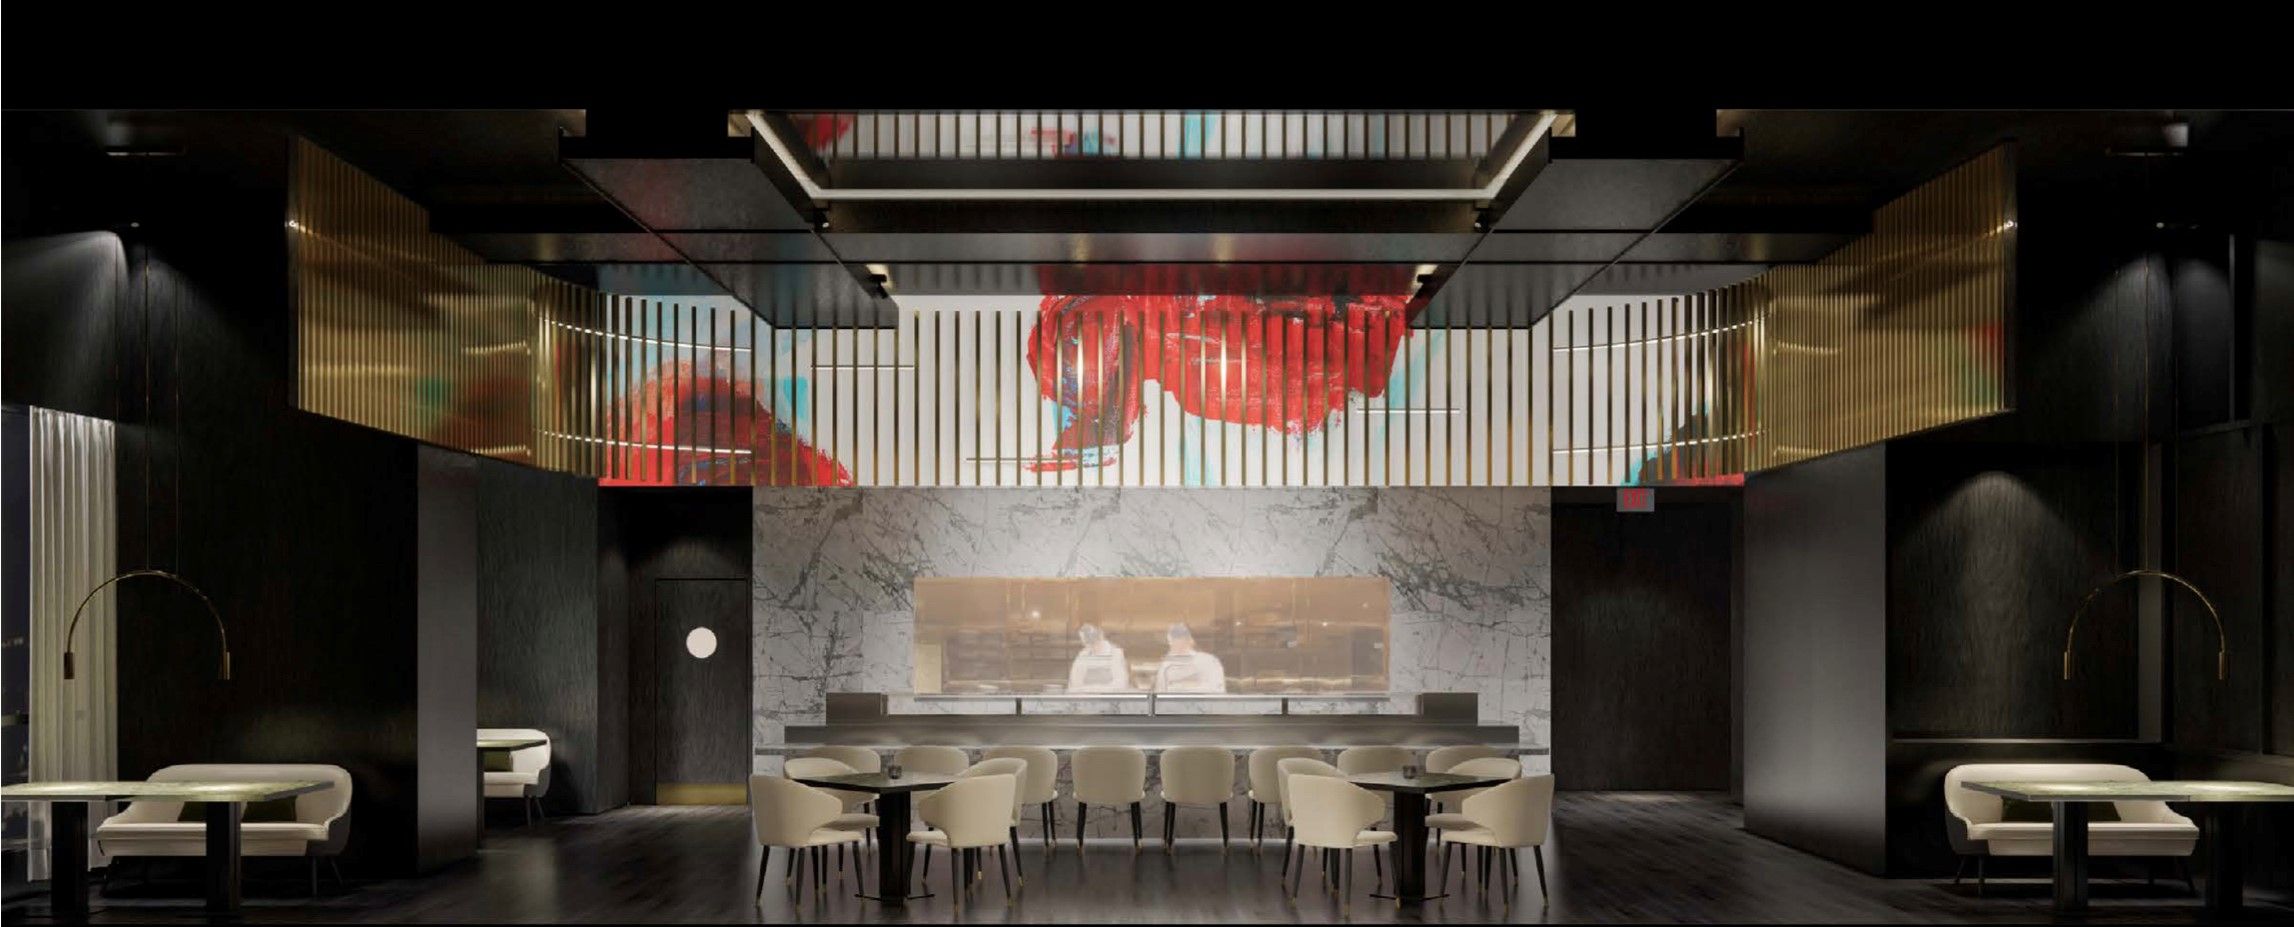 A rendering of the interior of a sushi bar, with seats facing the open kitchen and booths on either side.